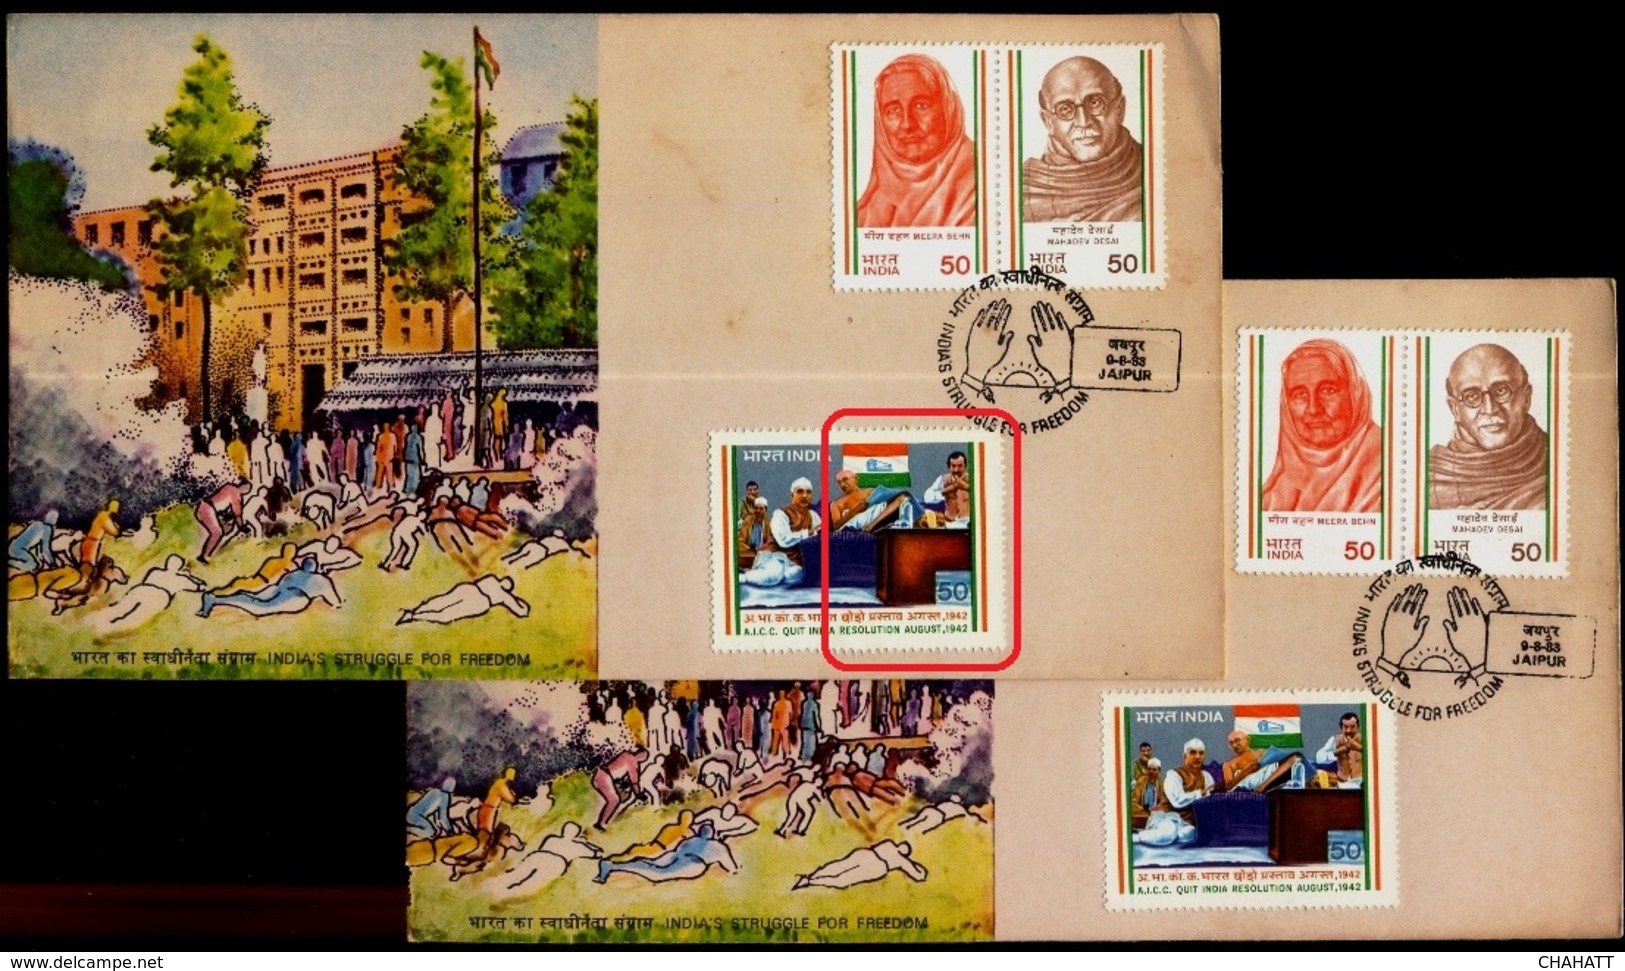 STURGGLE FOR FREEDOM-COMBINATION FDC-SETENANT PAIR ON FDC-INDIA-1983-EFO-SET OF 3 FDCs-BX2-4 - Errors, Freaks & Oddities (EFO)